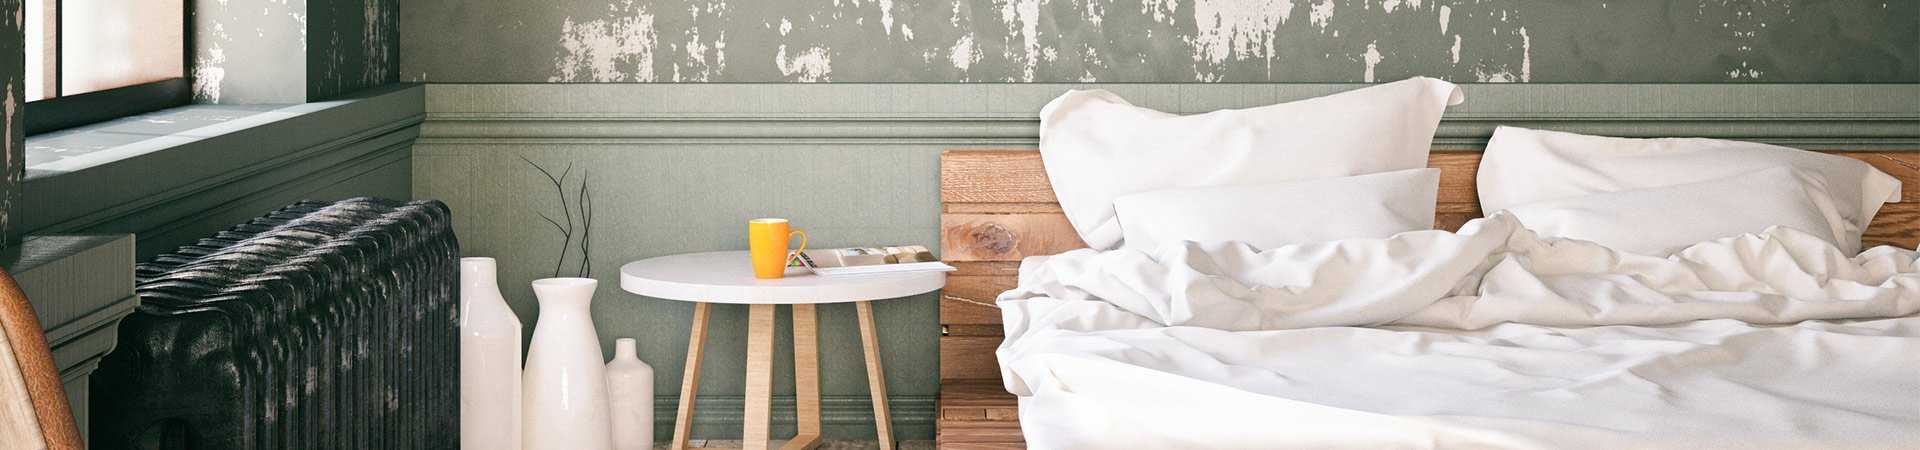 how-to-recycle-and-upcycle-your-old-towels-duvets-blankets-and-bed-linen